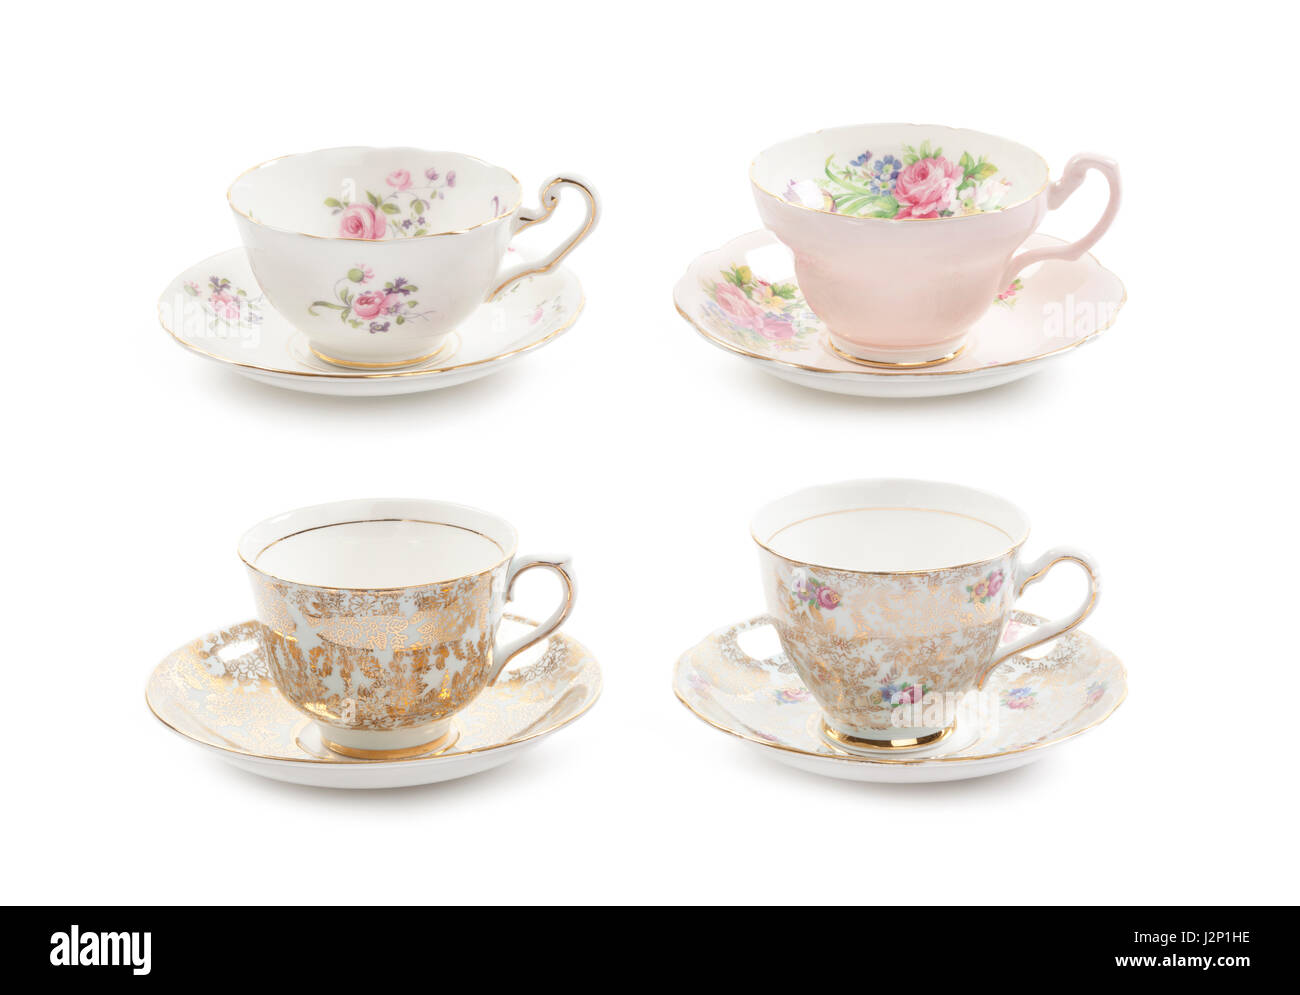 High resolution close-up of four beautiful antique tea cups with saucers isolated on a white background. Stock Photo